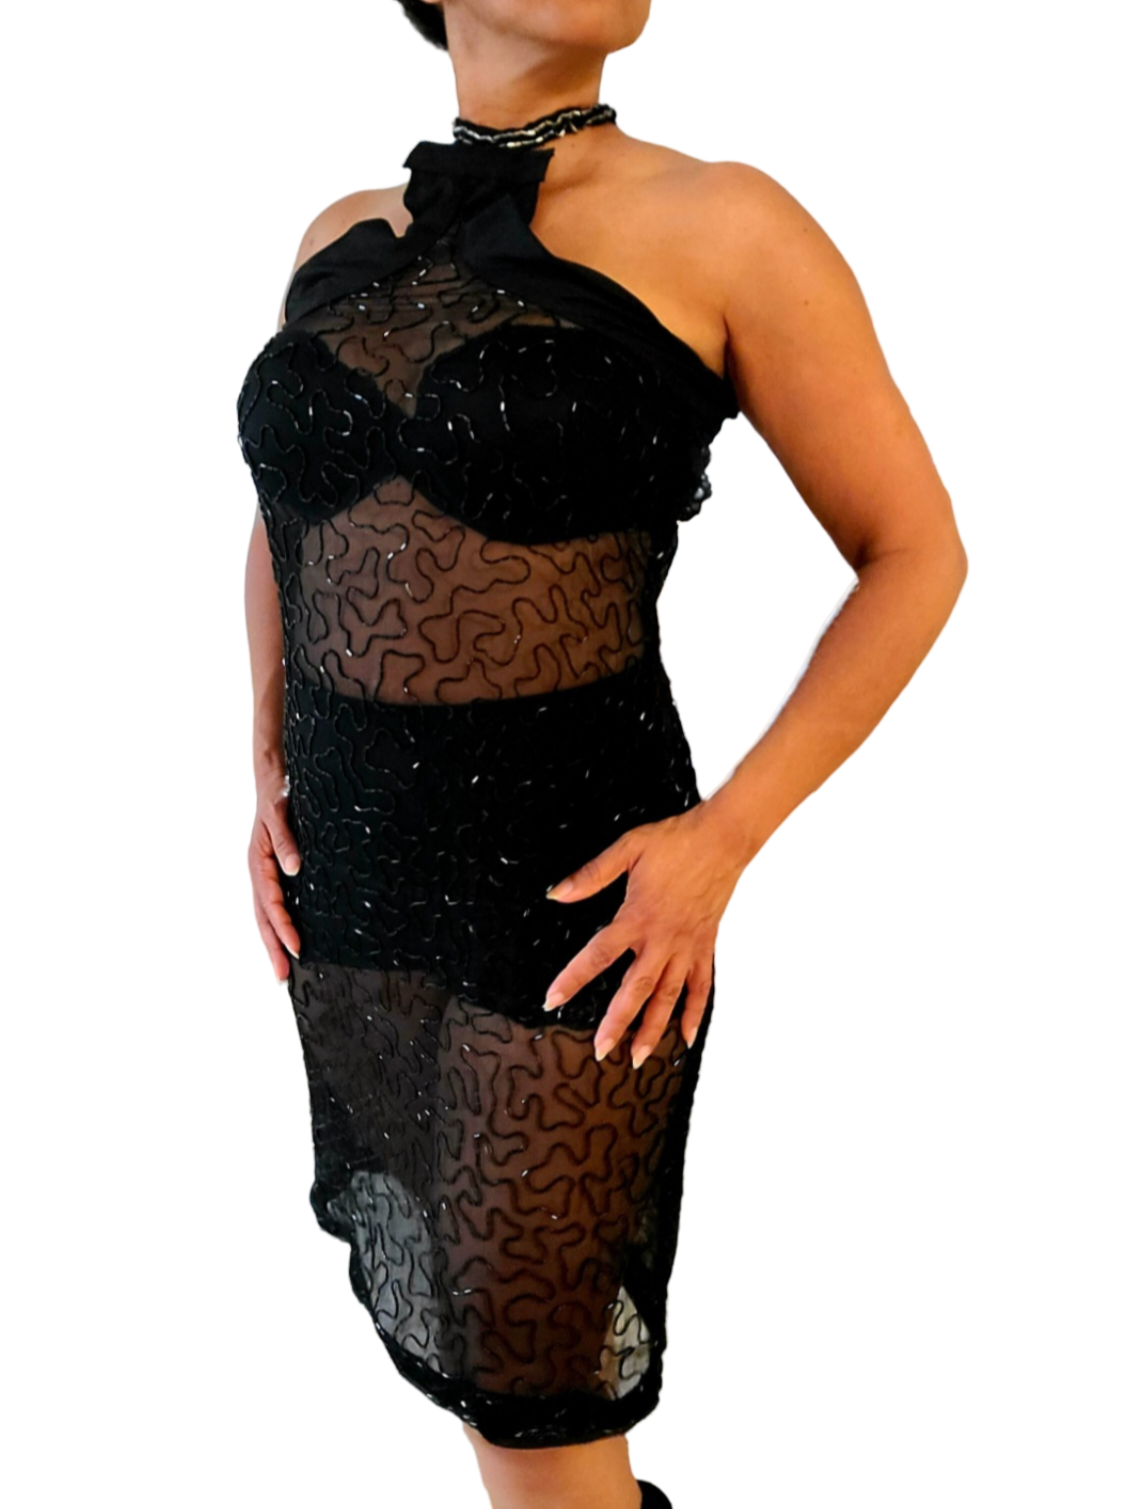 Don't shy away. The world is yours. Let's keep it healthy. Celebrate your curves with this evening dress. See through fabric high-quality beads. Elegant midi.  Back zipper closure and sleek halter bodice. Style as you want to show less or show more...